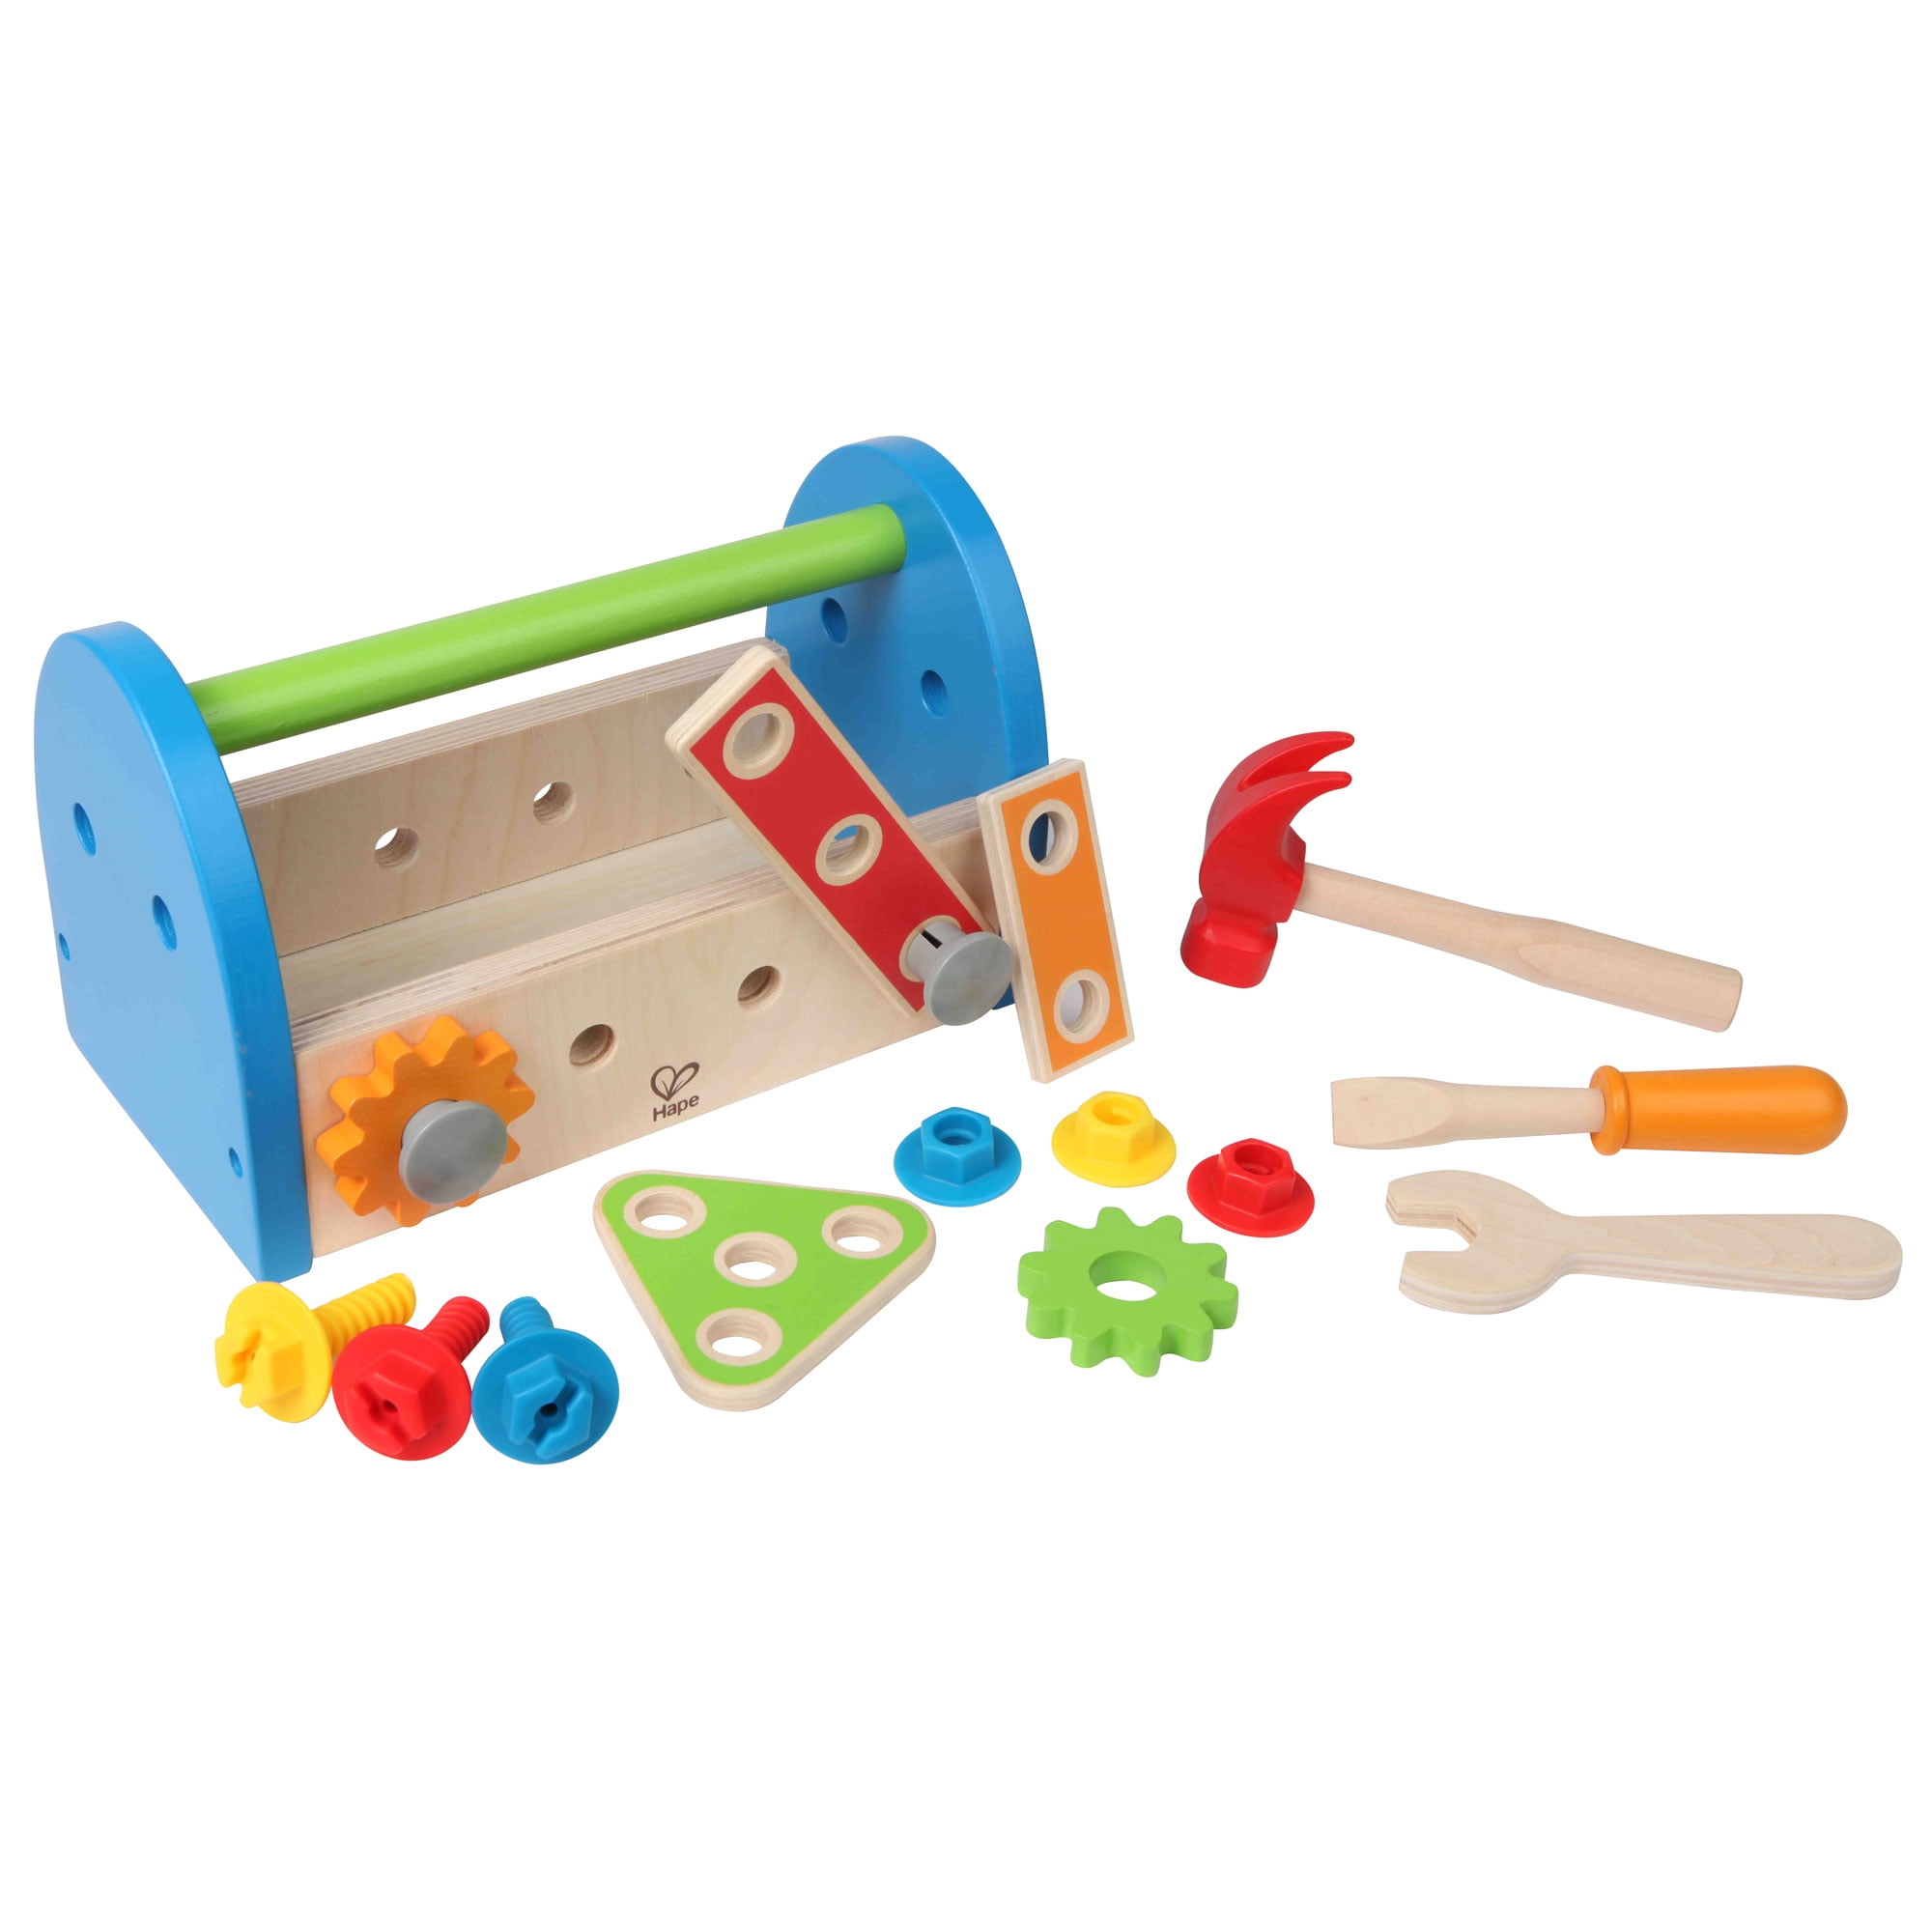 Details about   Boxiki Kids Toddler Tool Set Tools Kids Wooden Toys Puzzle Learning Activities 3 